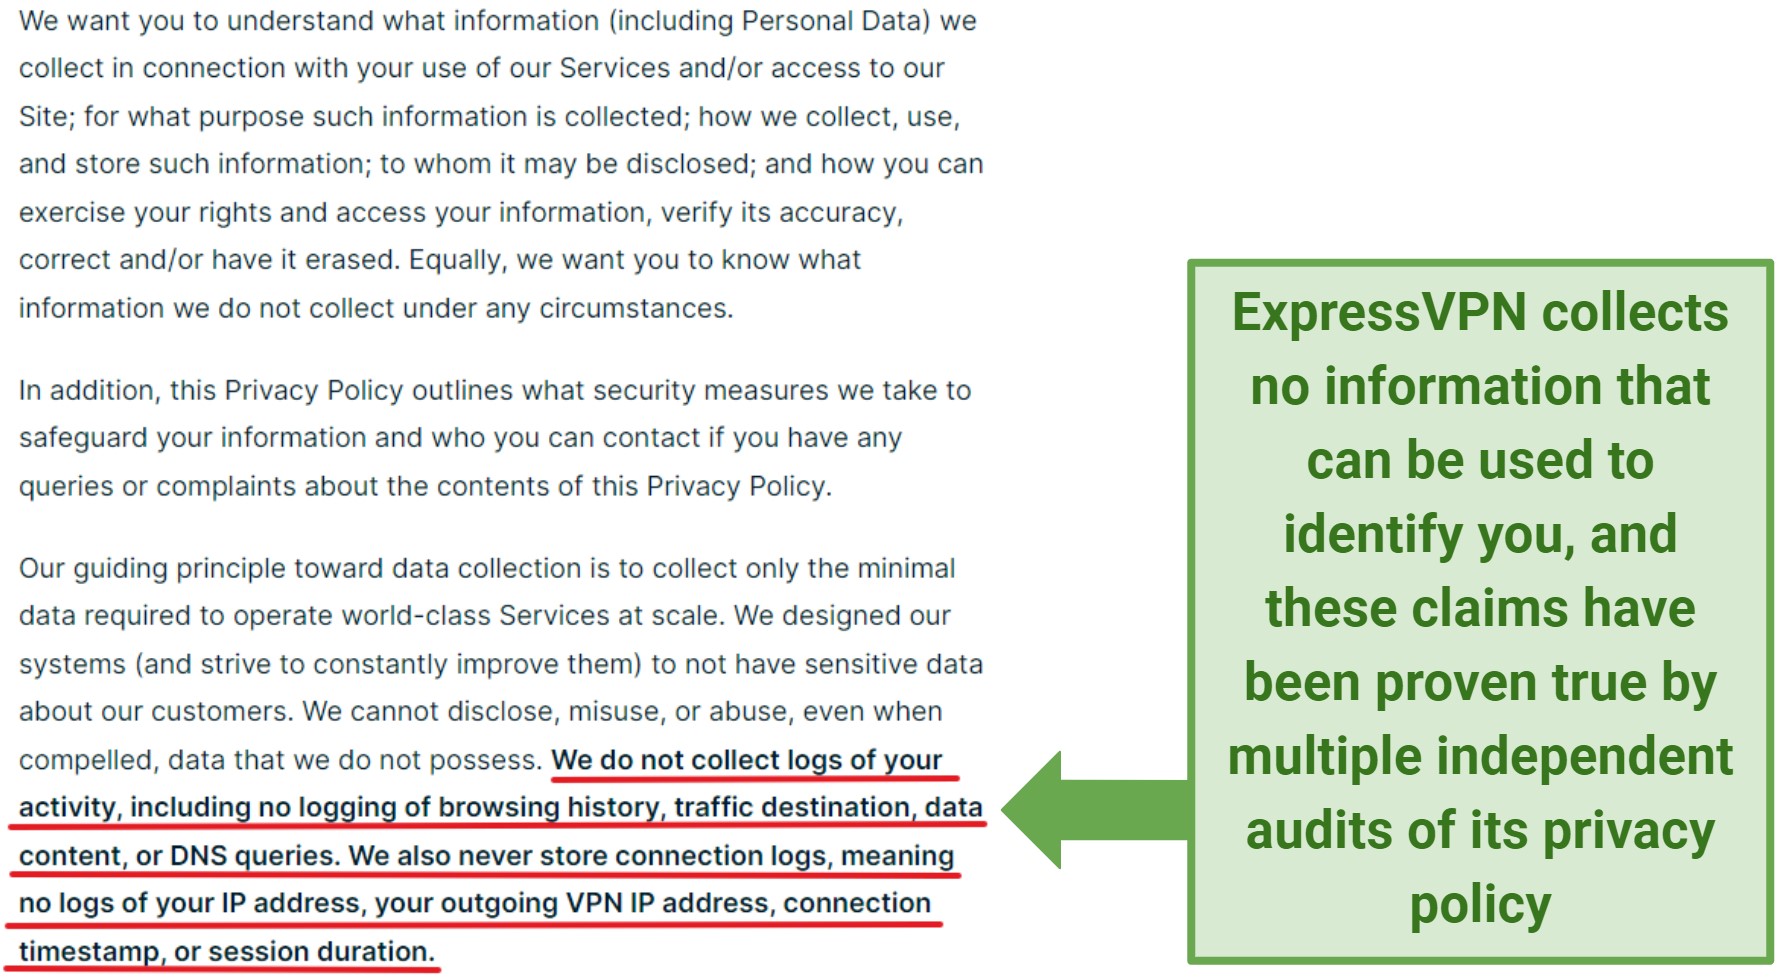 Screenshot of ExpressVPN's privacy policy